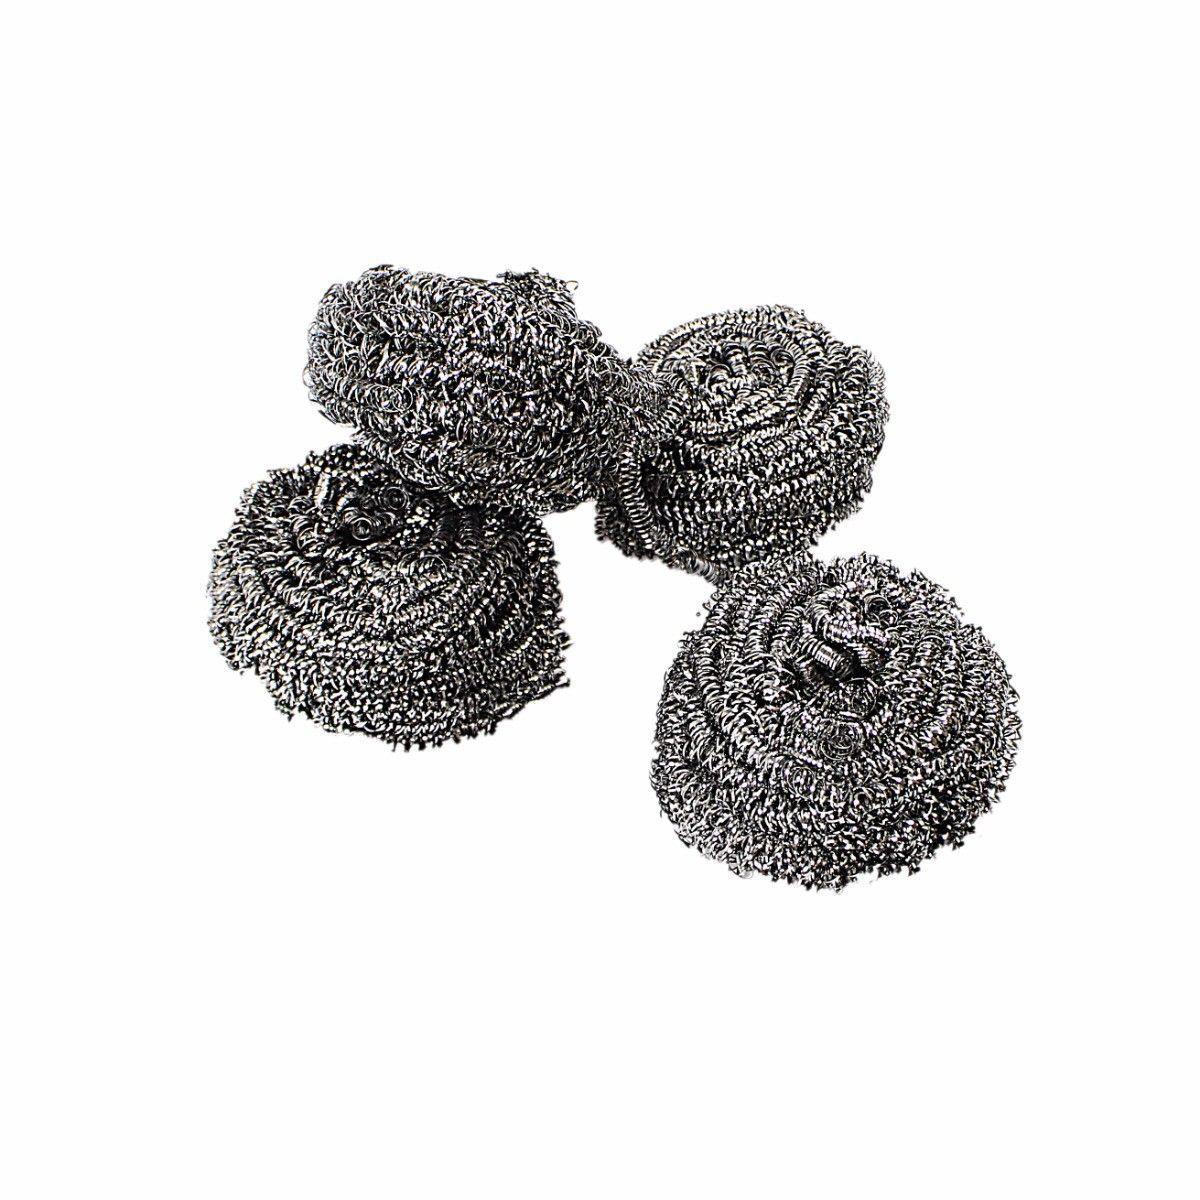 Stainless Steel Super Fine Scourers 4 Pack 4899 (Parcel Rate)